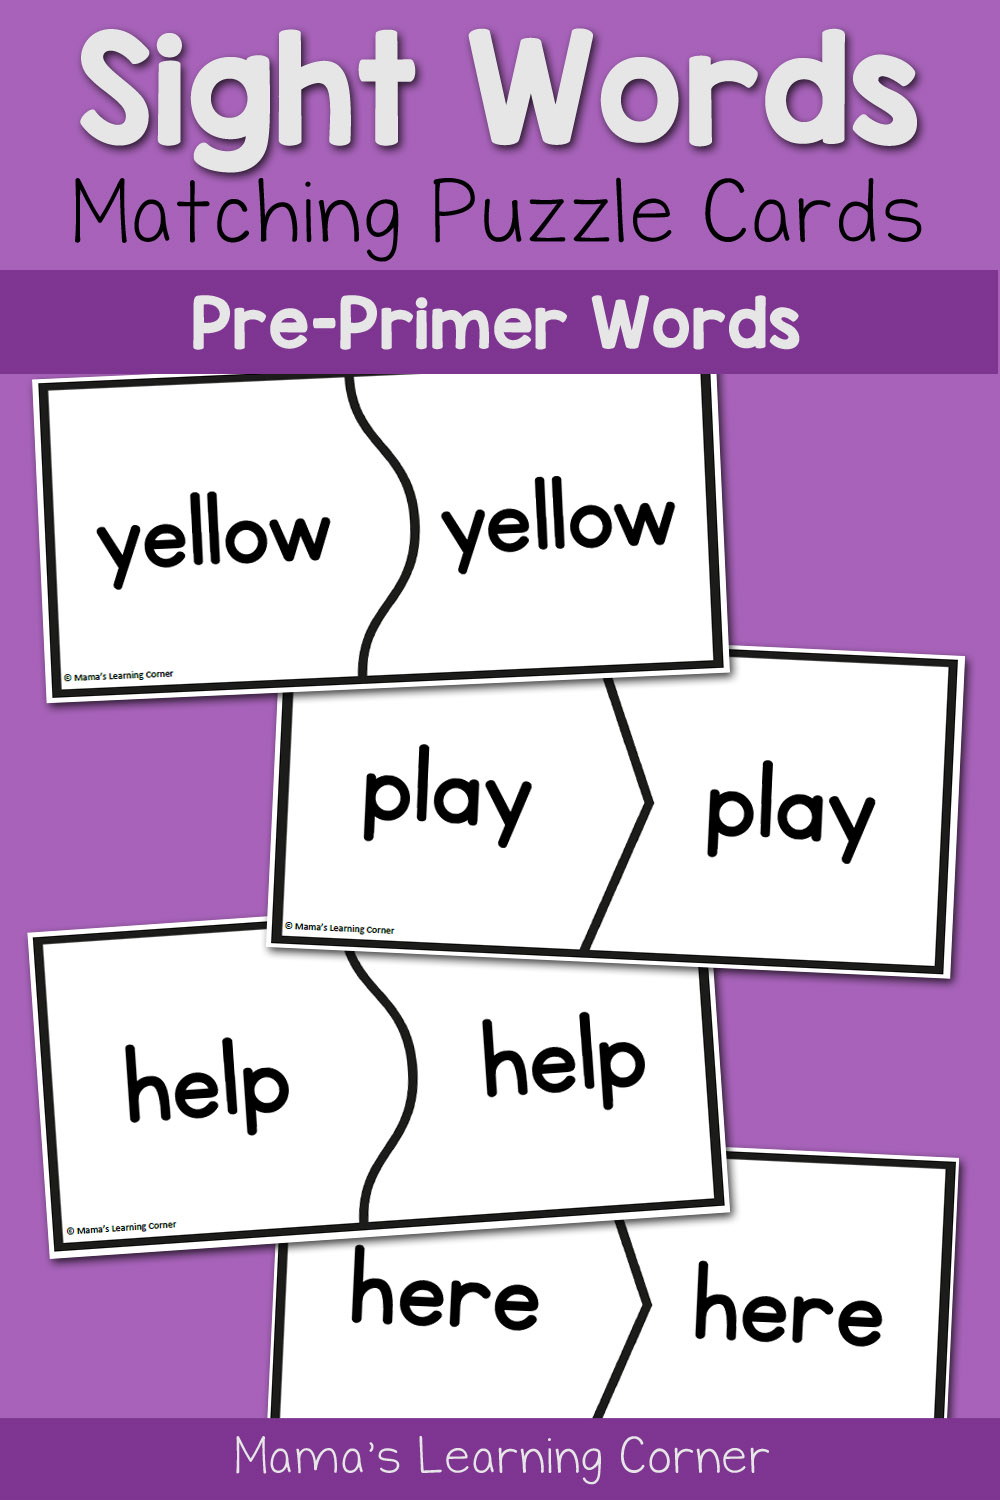 Words for Basic  worksheets   Kindergarten words basic kindergarten  Mamas Cards Sight Practice sight with Puzzle